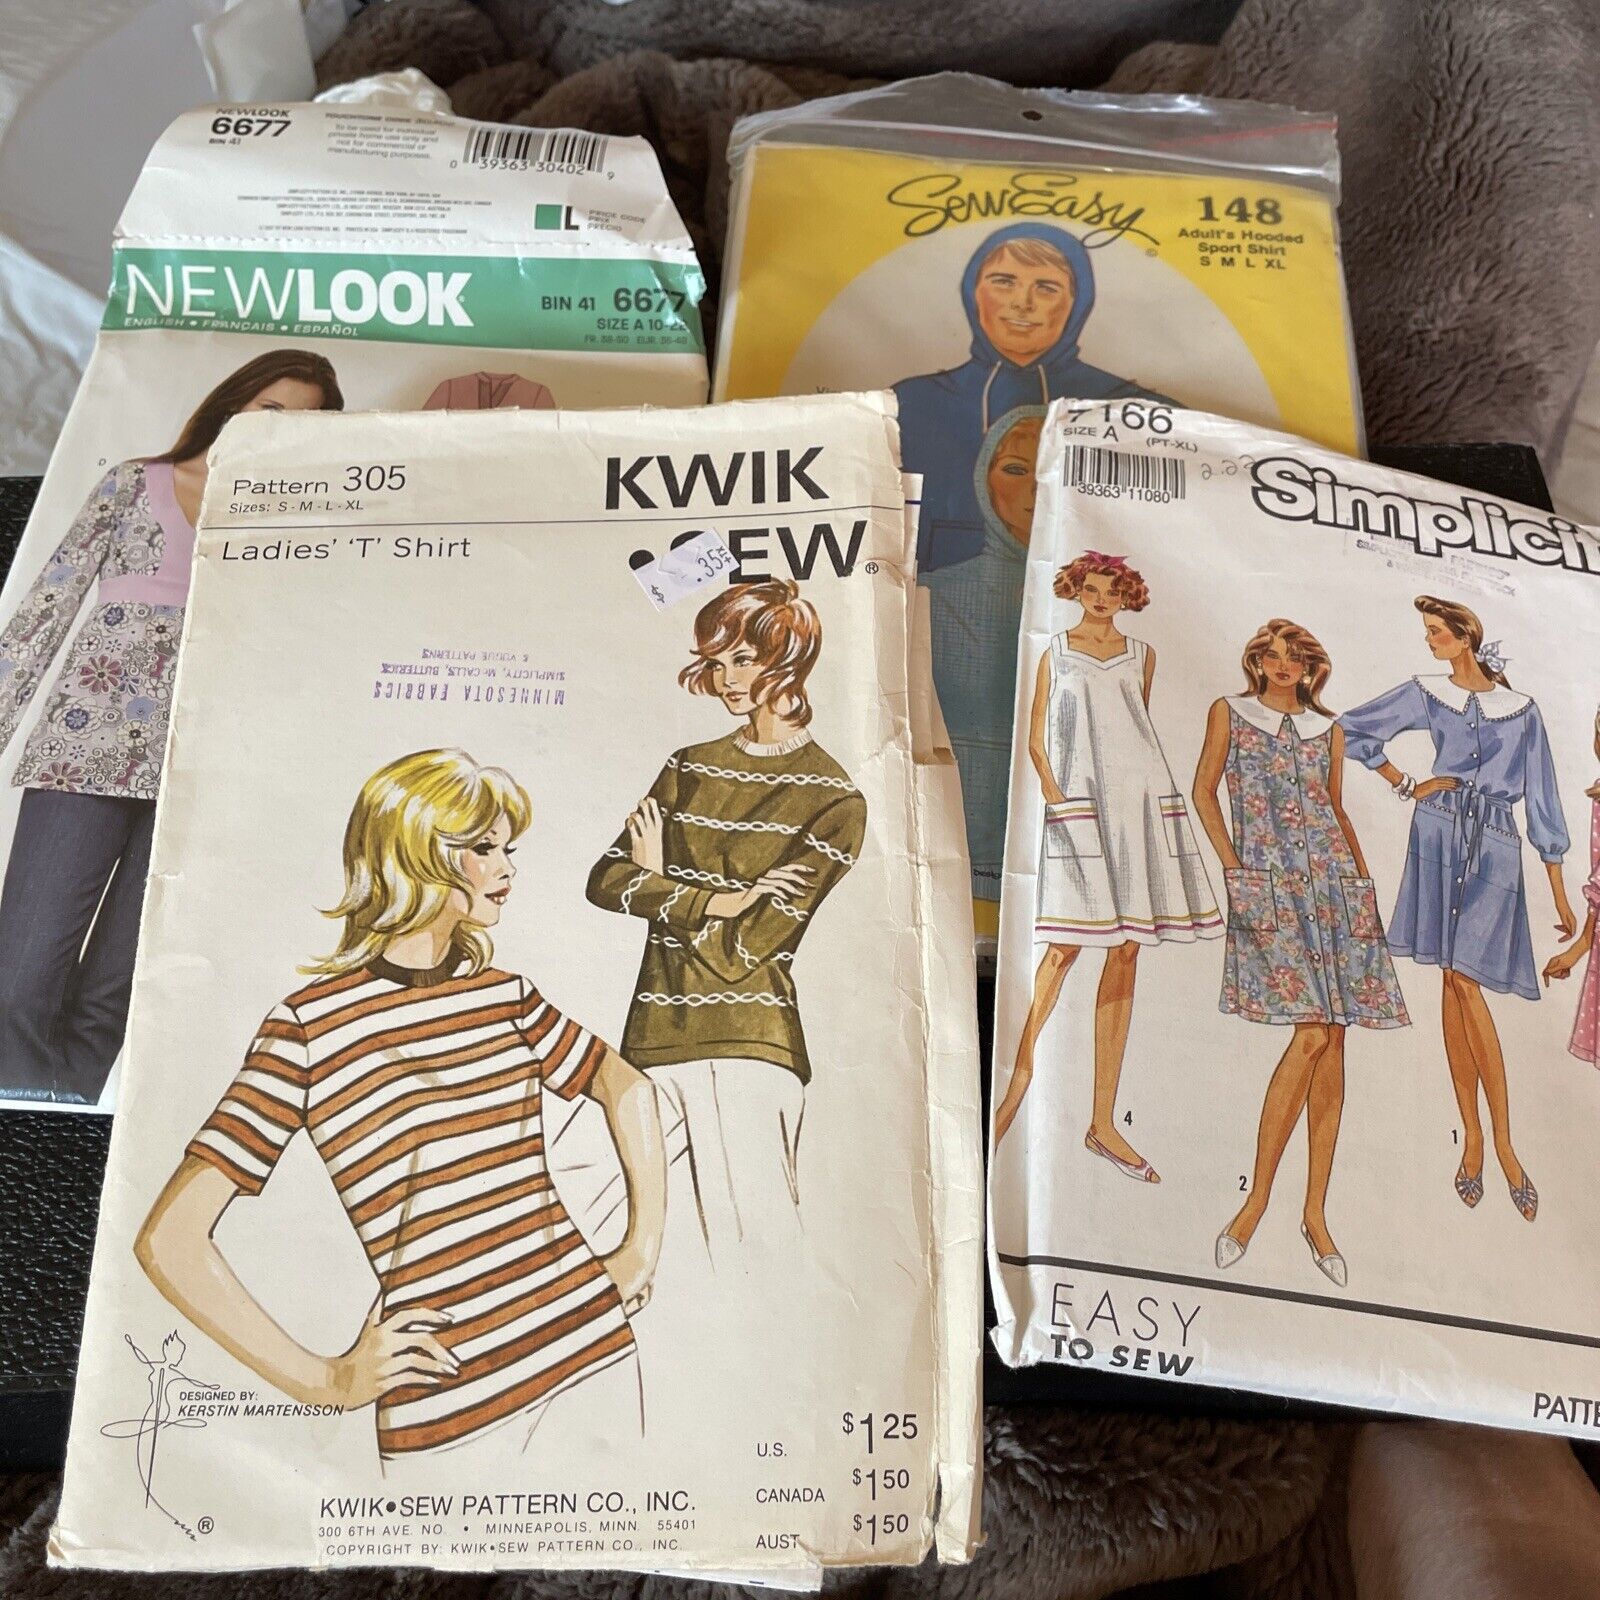 Vintage Sewing Patterns Lot of 4 Retro 1940s 1930s 1960s 1950s